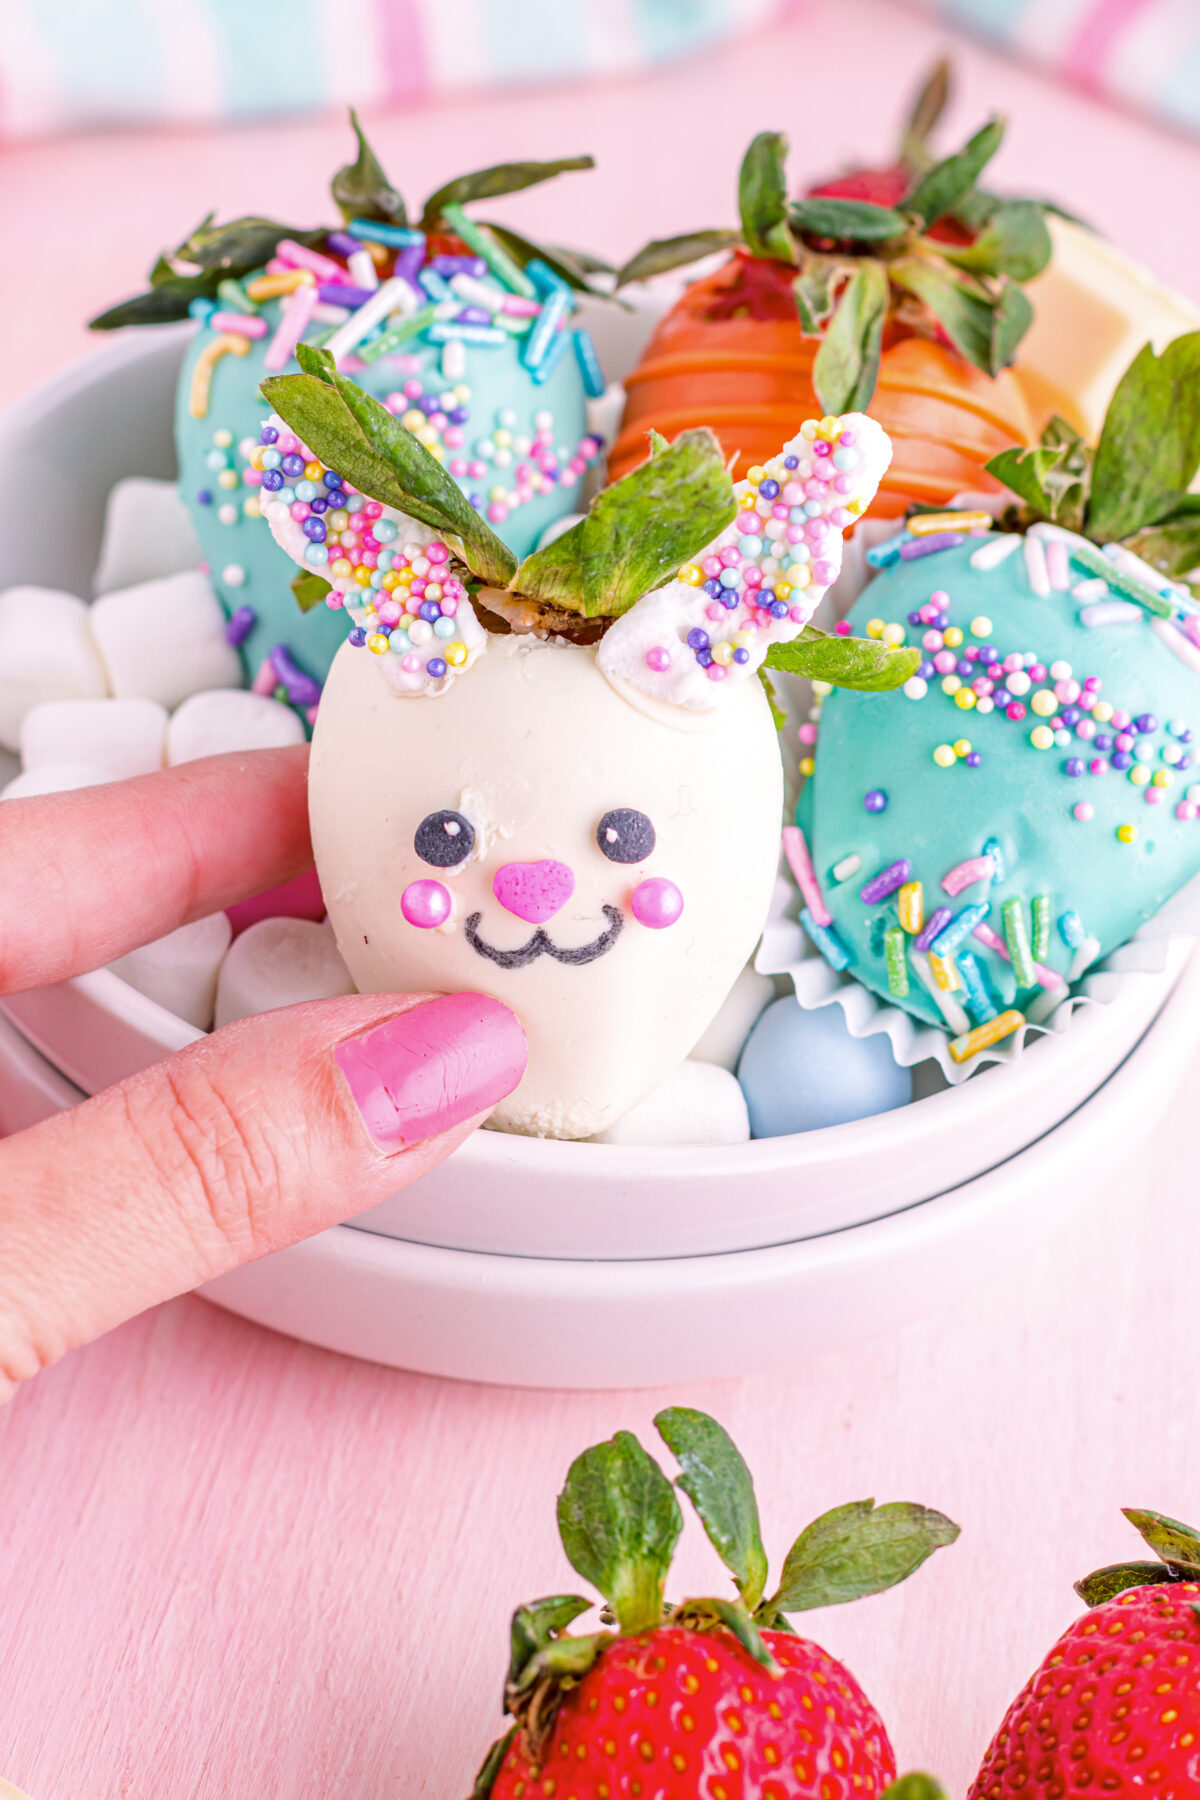 Looking for a delicious and easy Easter dessert? Check out our step-by-step guide to making Easter chocolate covered strawberries.